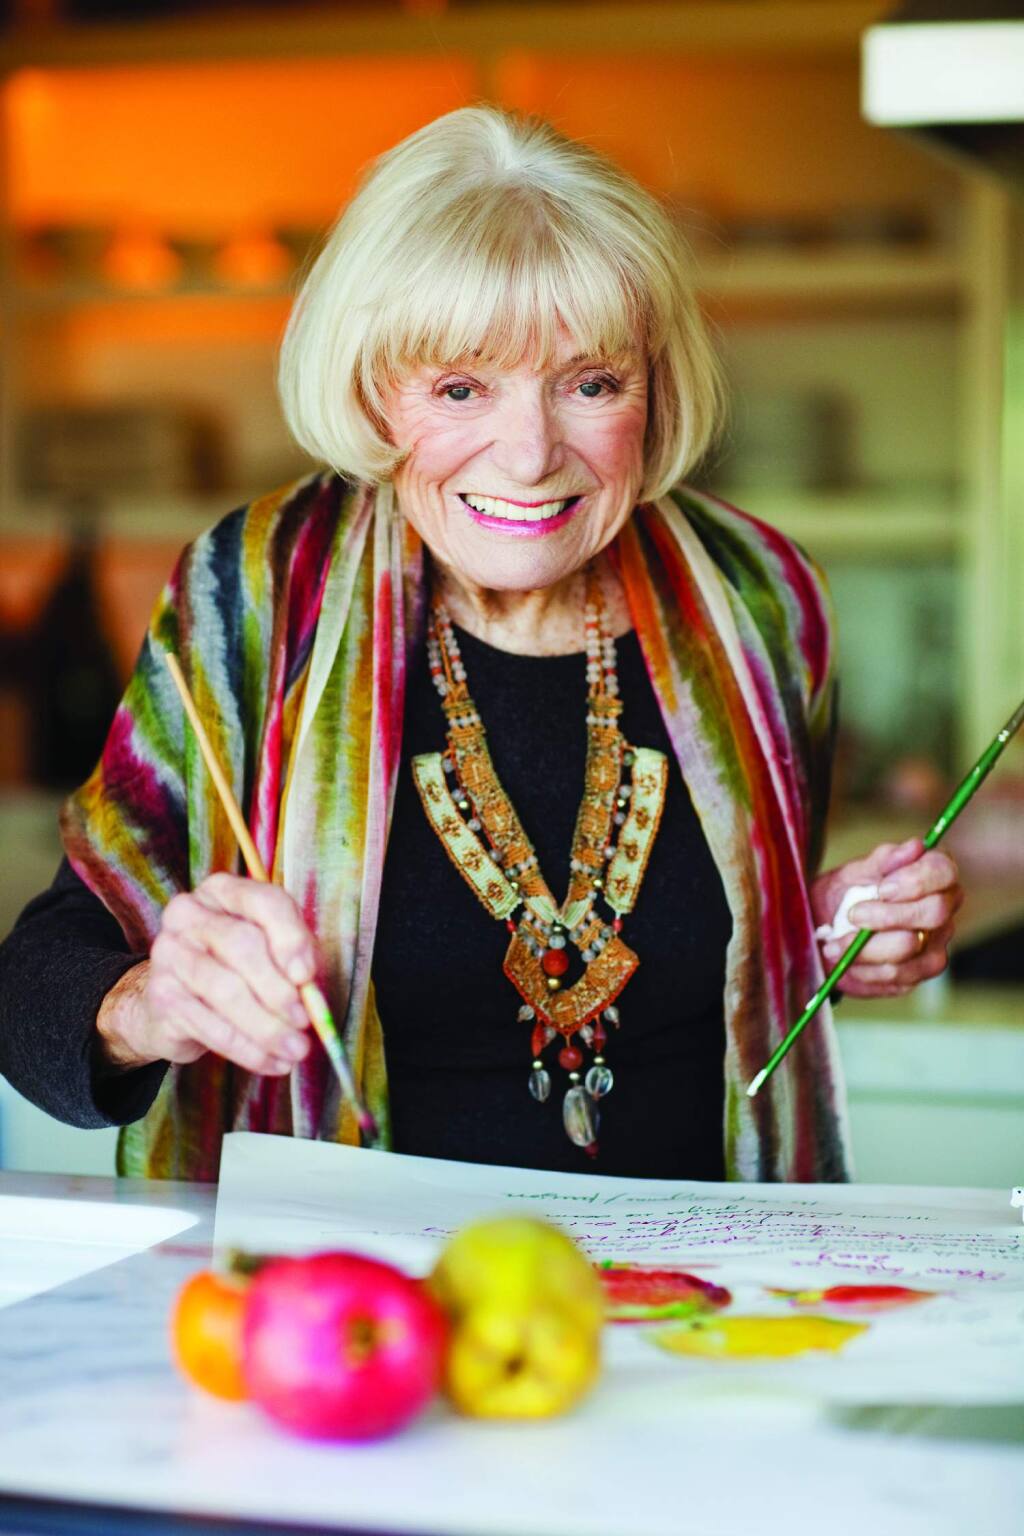 Margrit Mondavi was a working artist as well as a Napa Valley wine culture pioneer (ROBERT MONDAVI WINERY, Dec. 1, 2011)